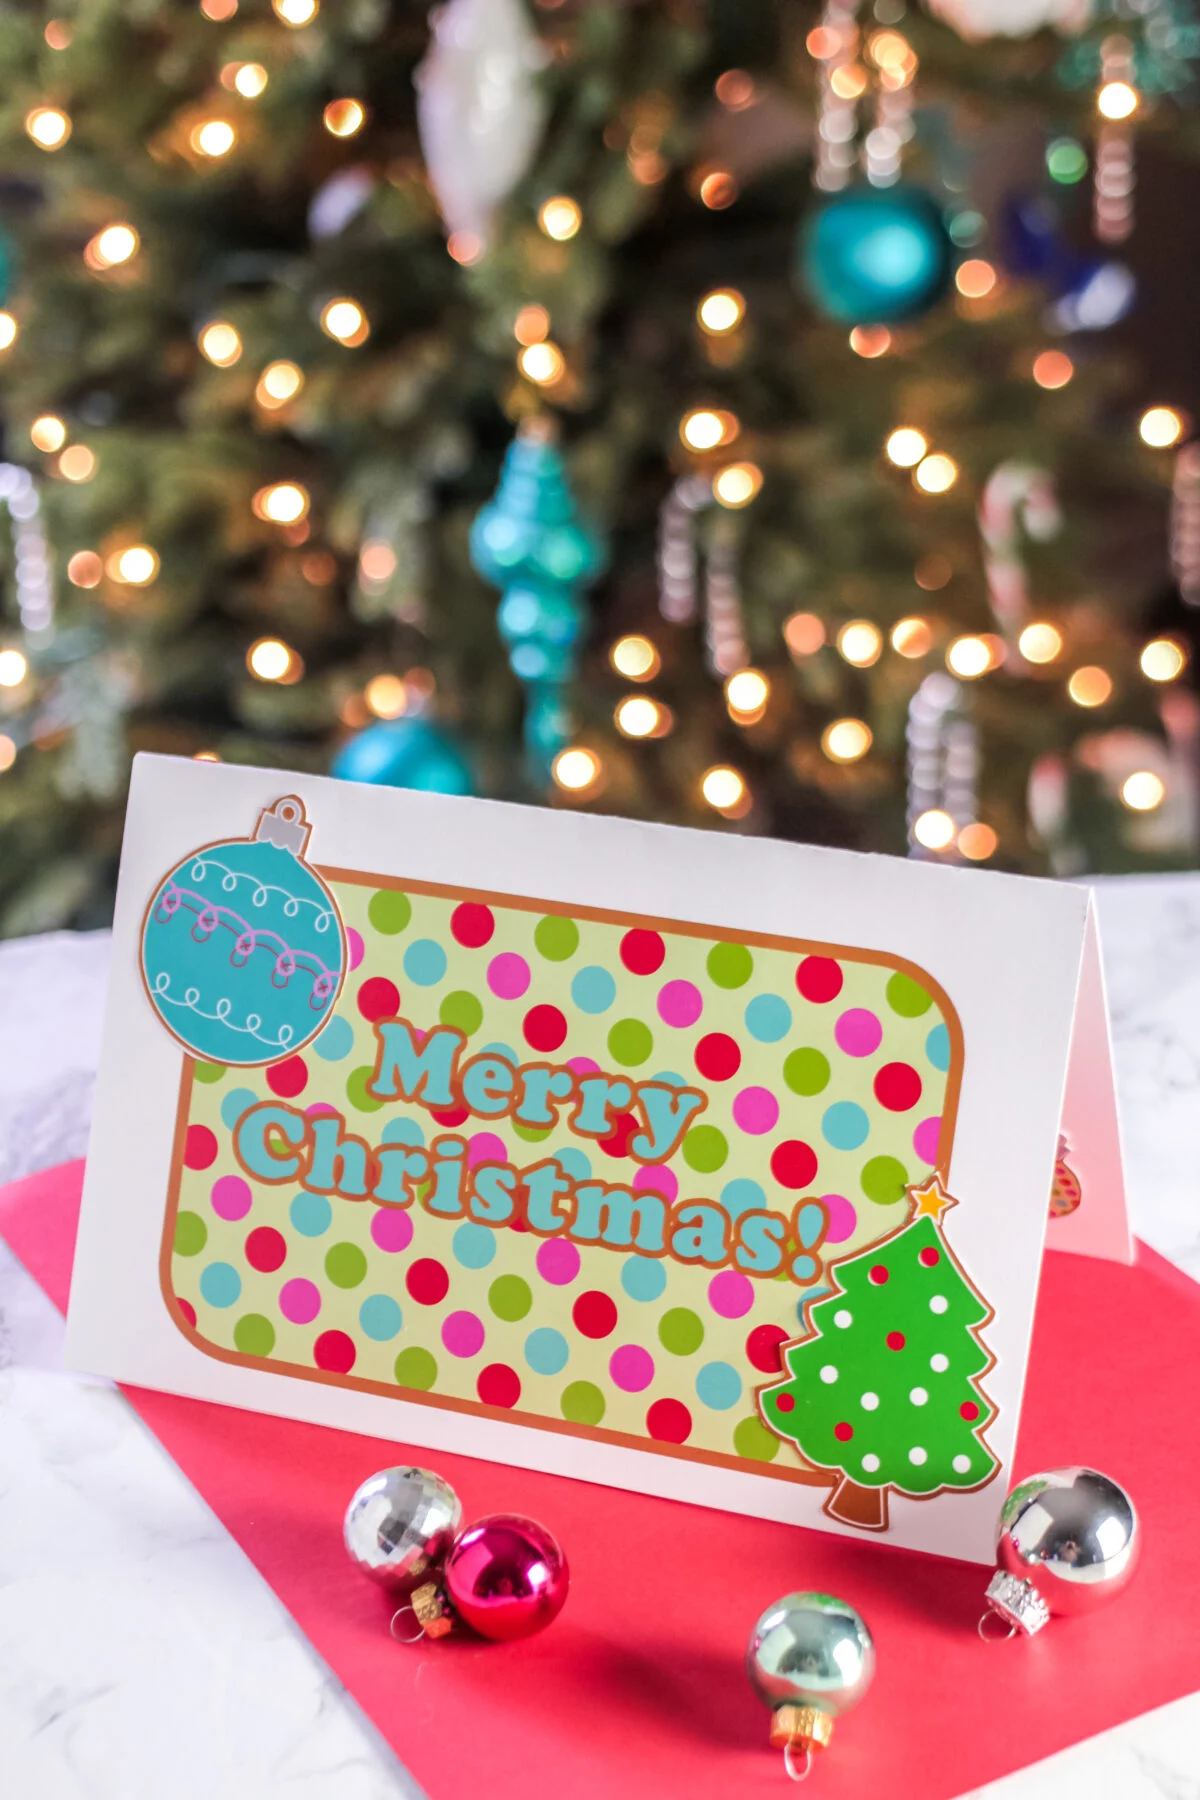 A free printable holiday card with a gingerbread pop up design. Download the pop up Christmas card template, cut and fold to make your own!